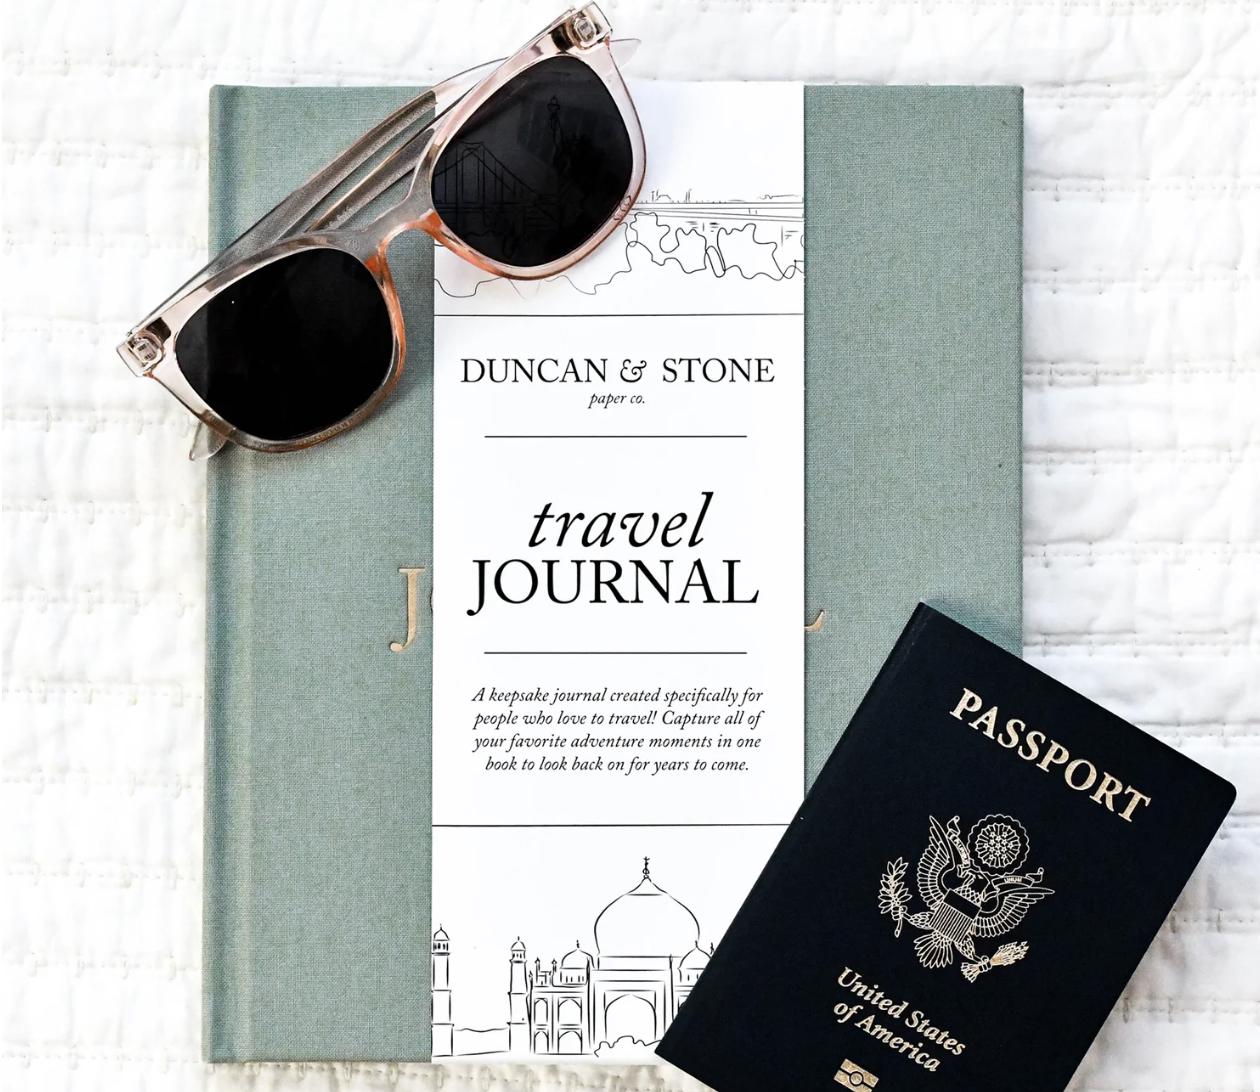 Travel Journal gift for Mom's who like to travel